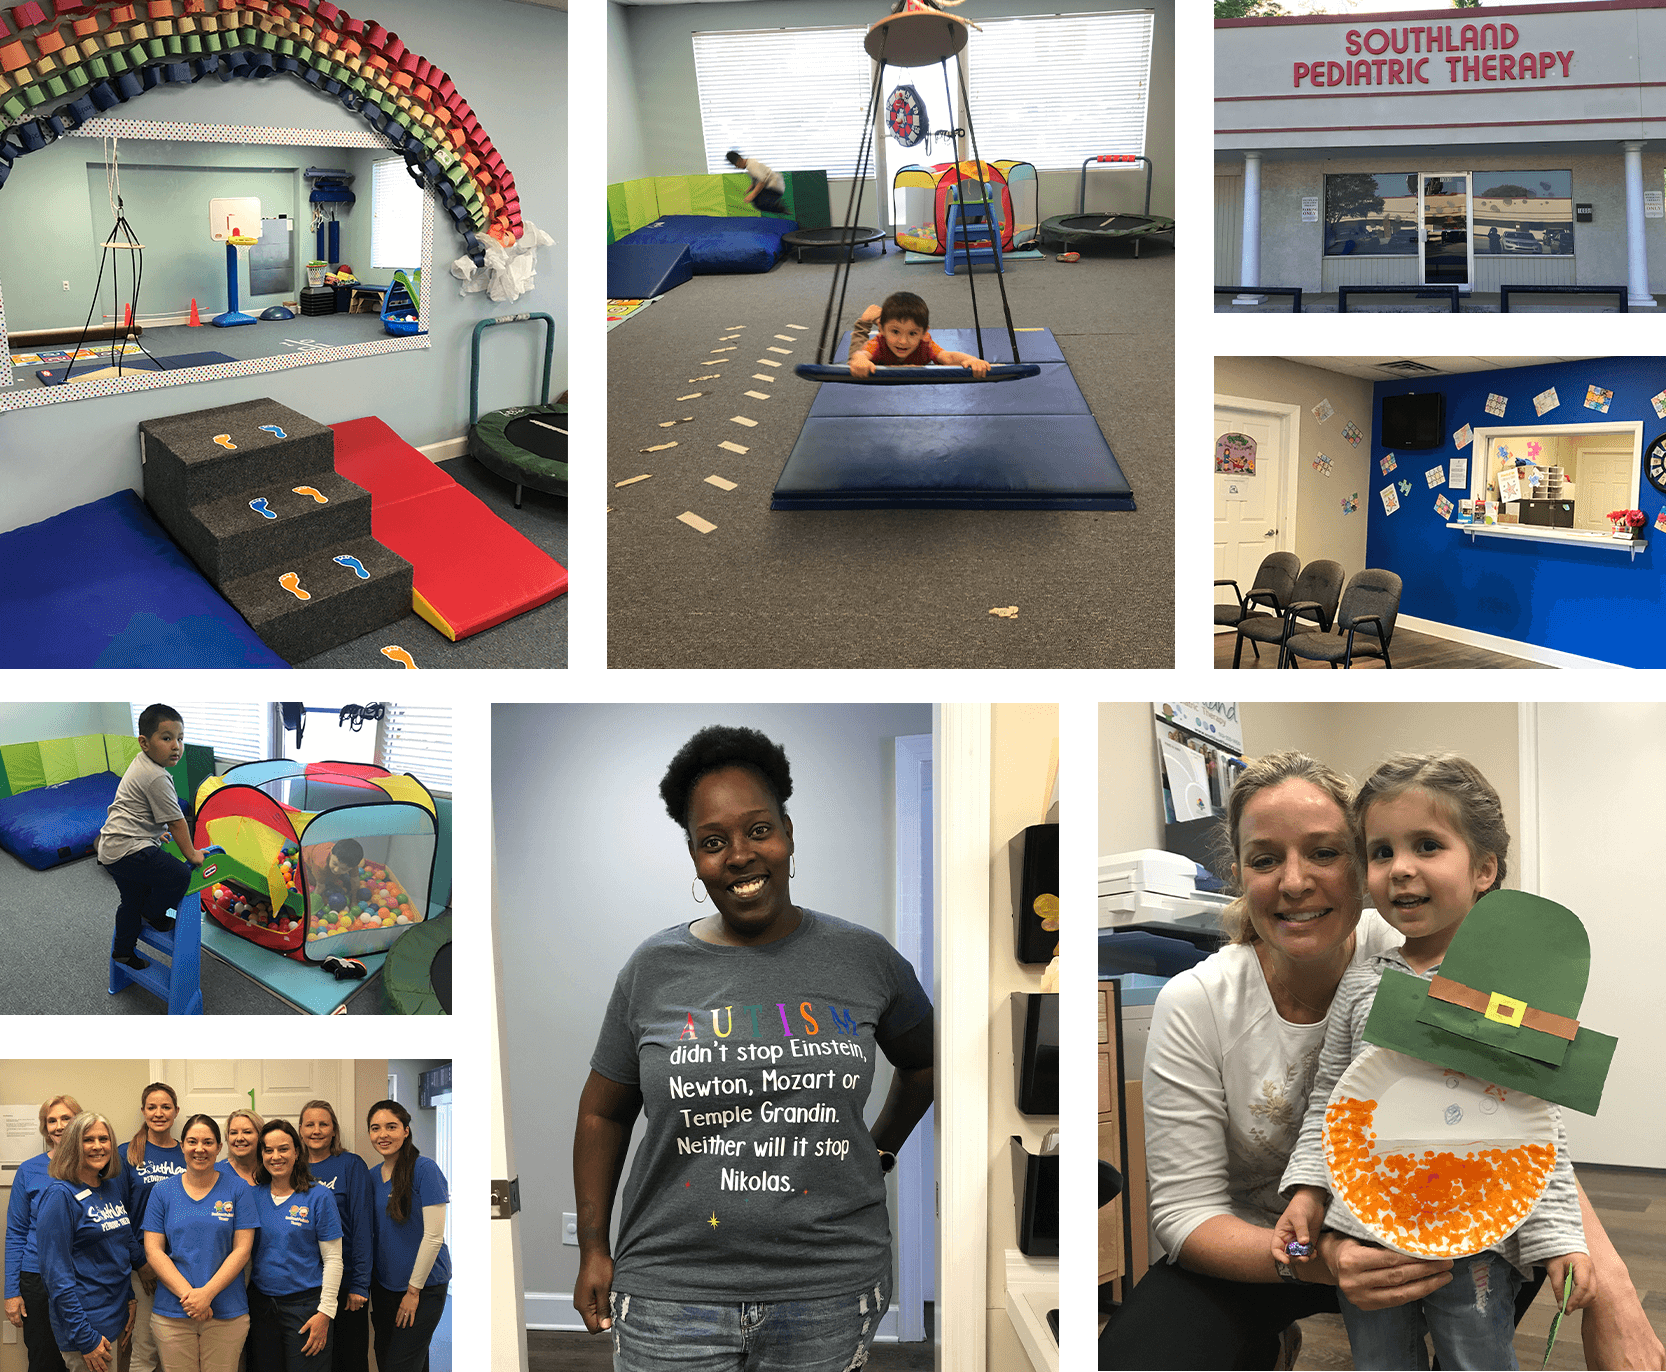 Collage of Southland Pediatric Therapy